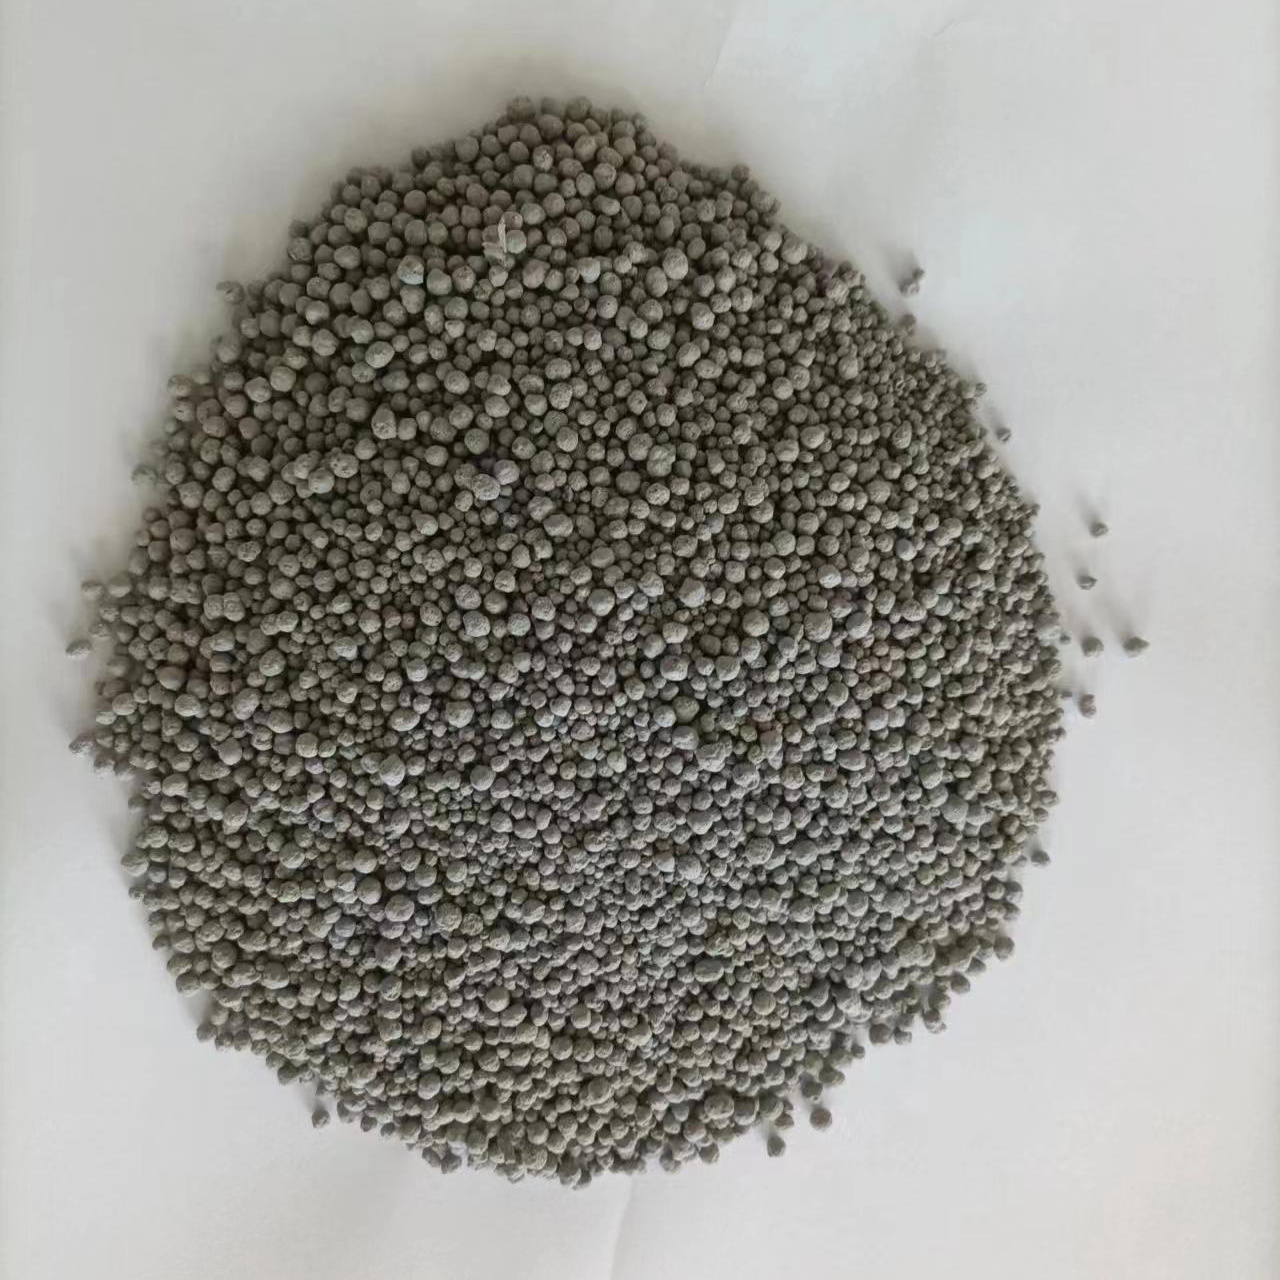 Activated carbon ball sand